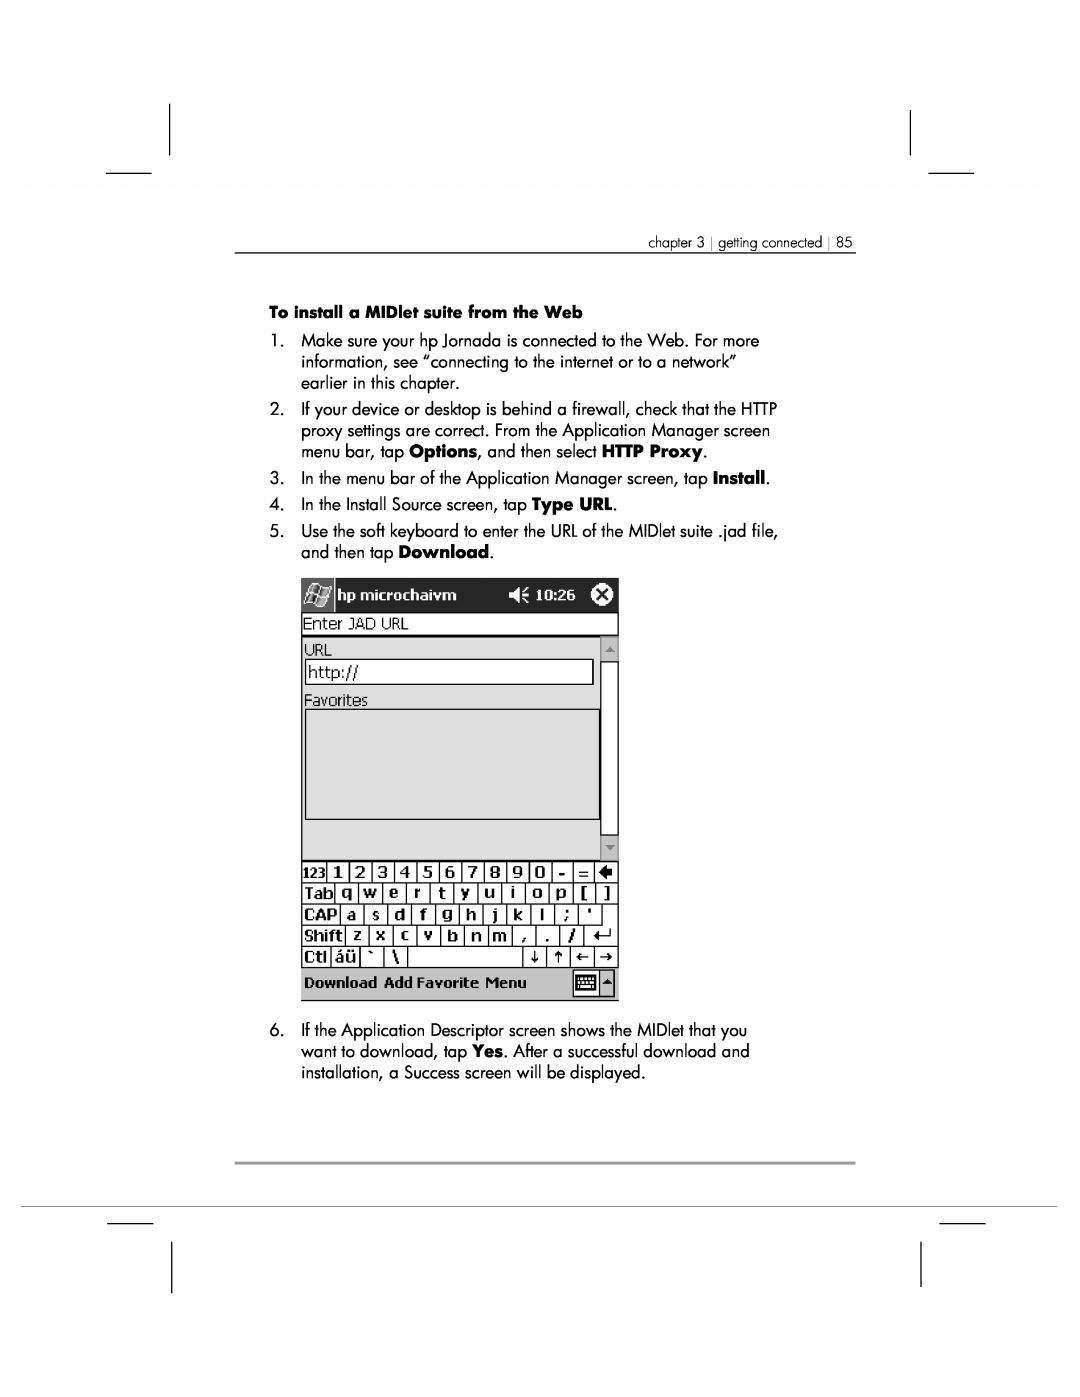 HP 920 manual In the menu bar of the Application Manager screen, tap Install 